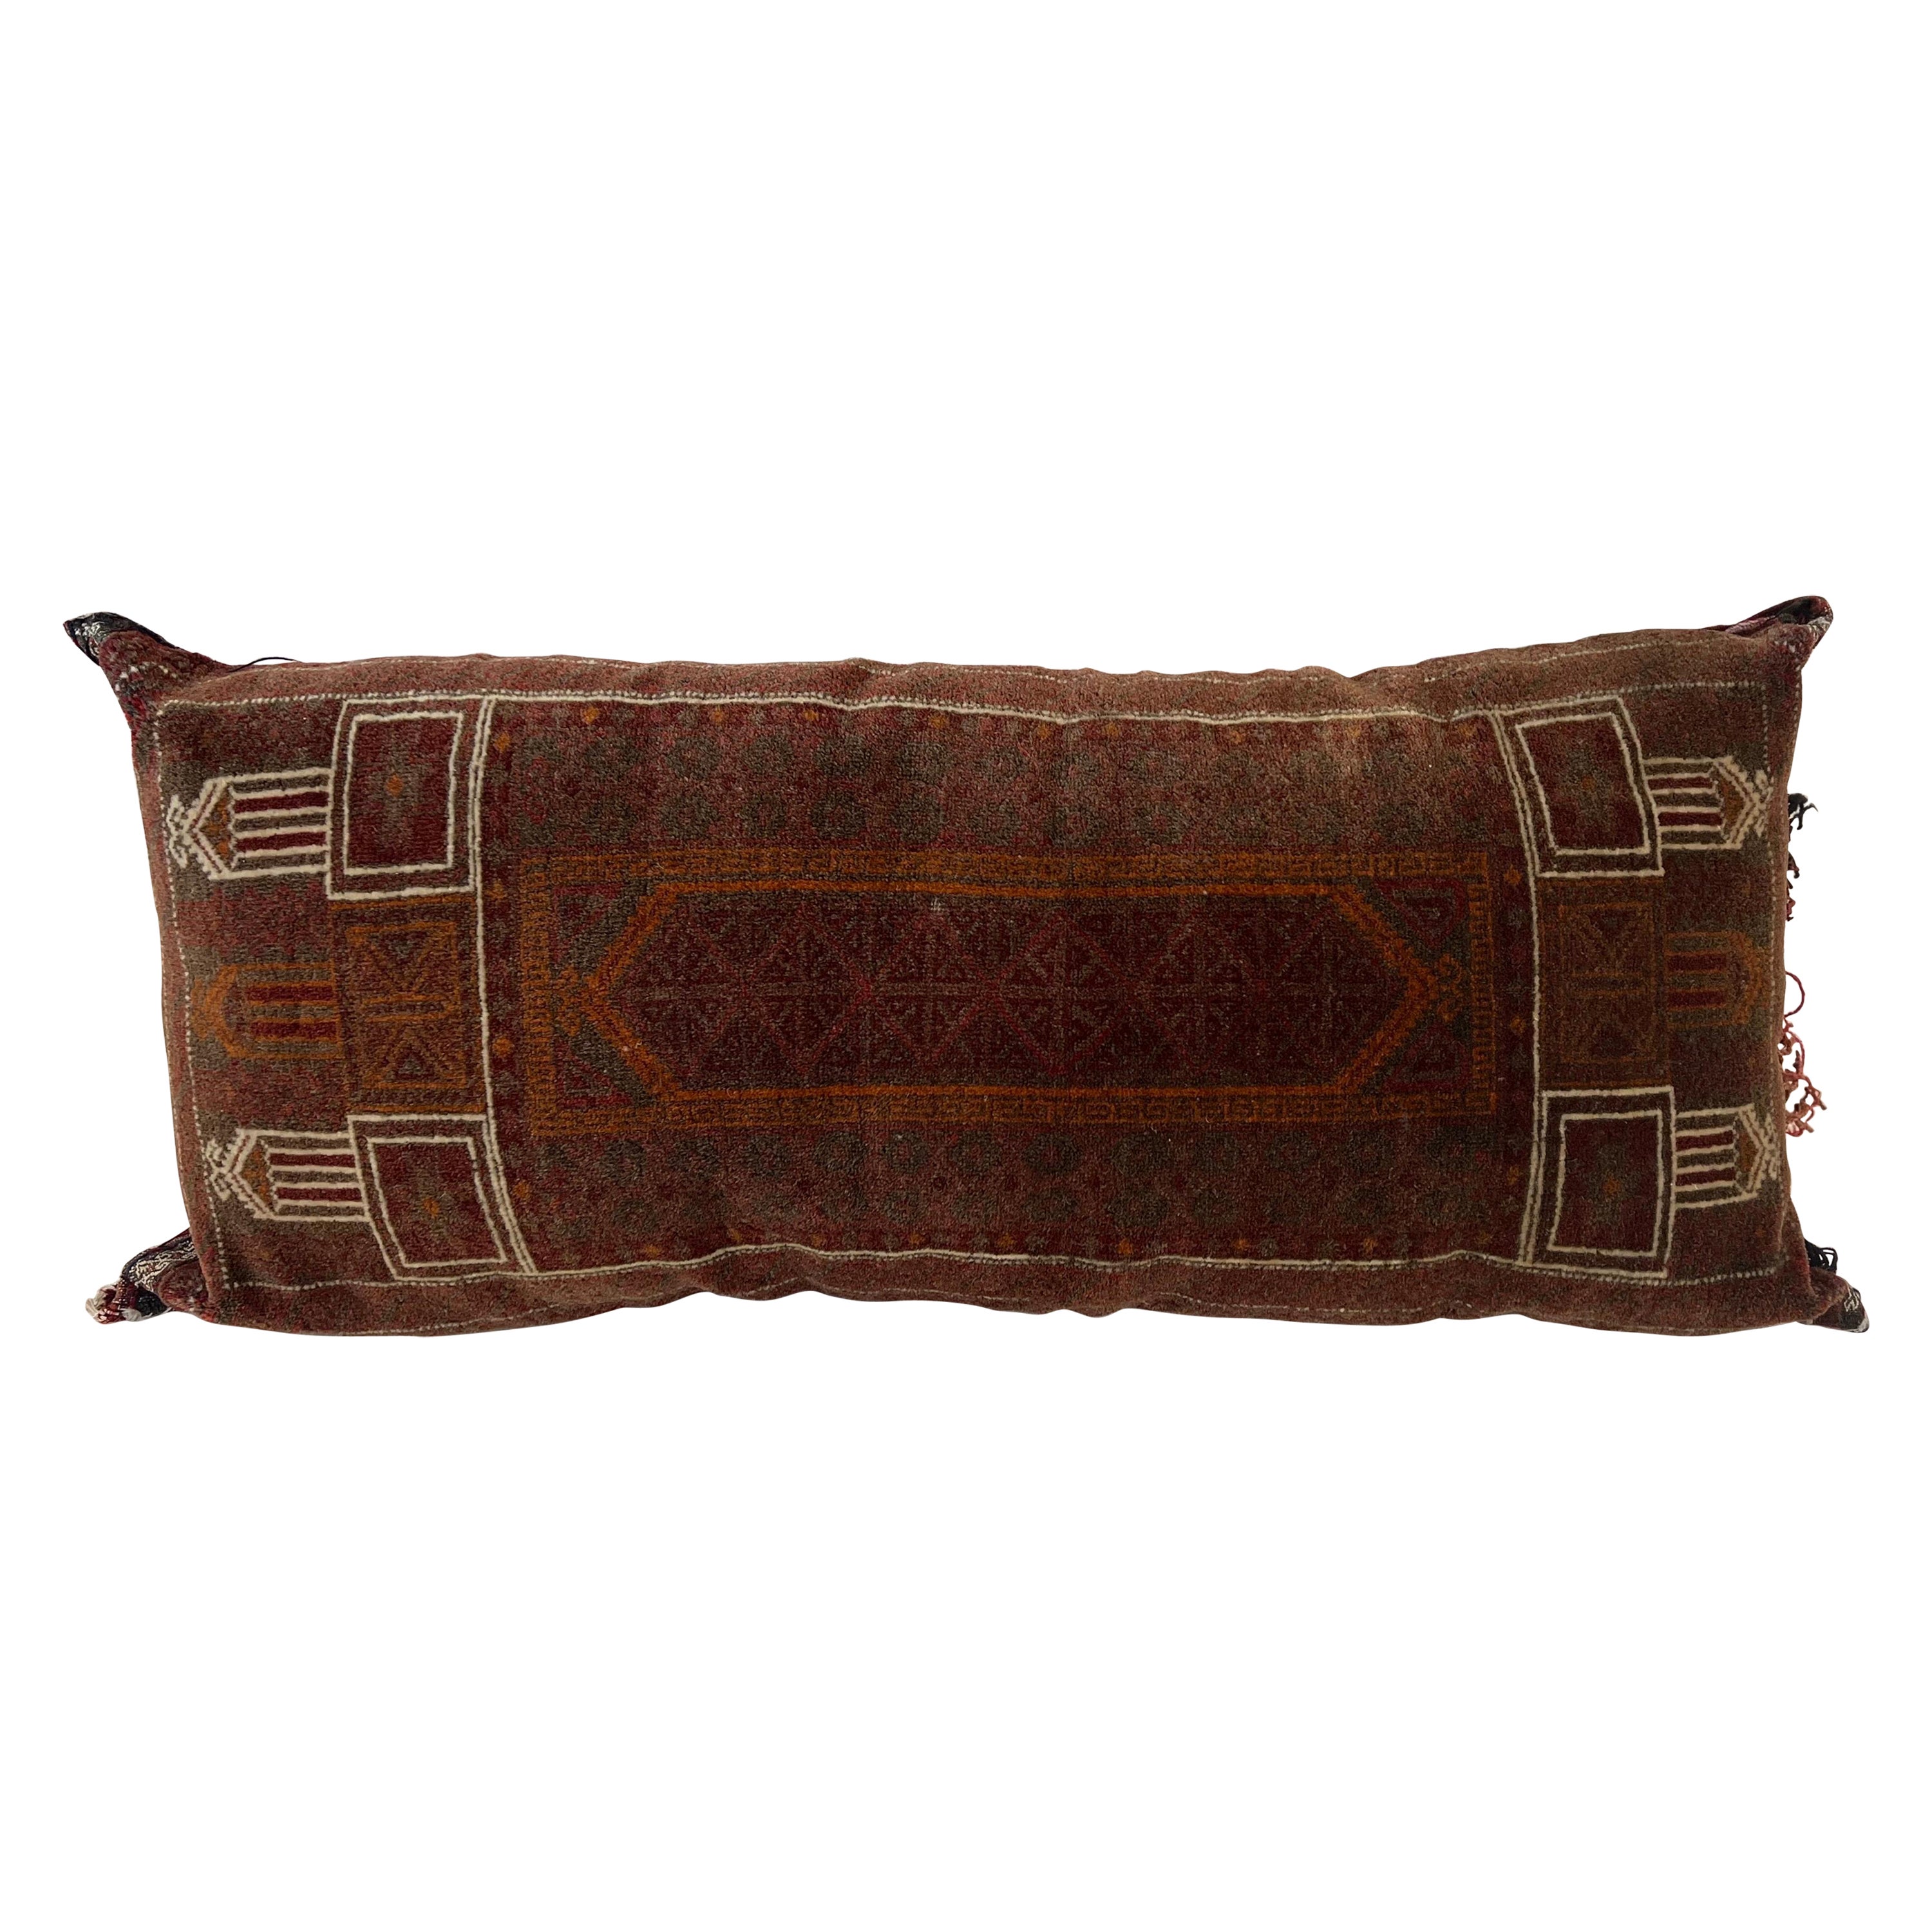 Large Vintage Pillow from Antique Yamud Rug Fragrant/Kilim For Sale